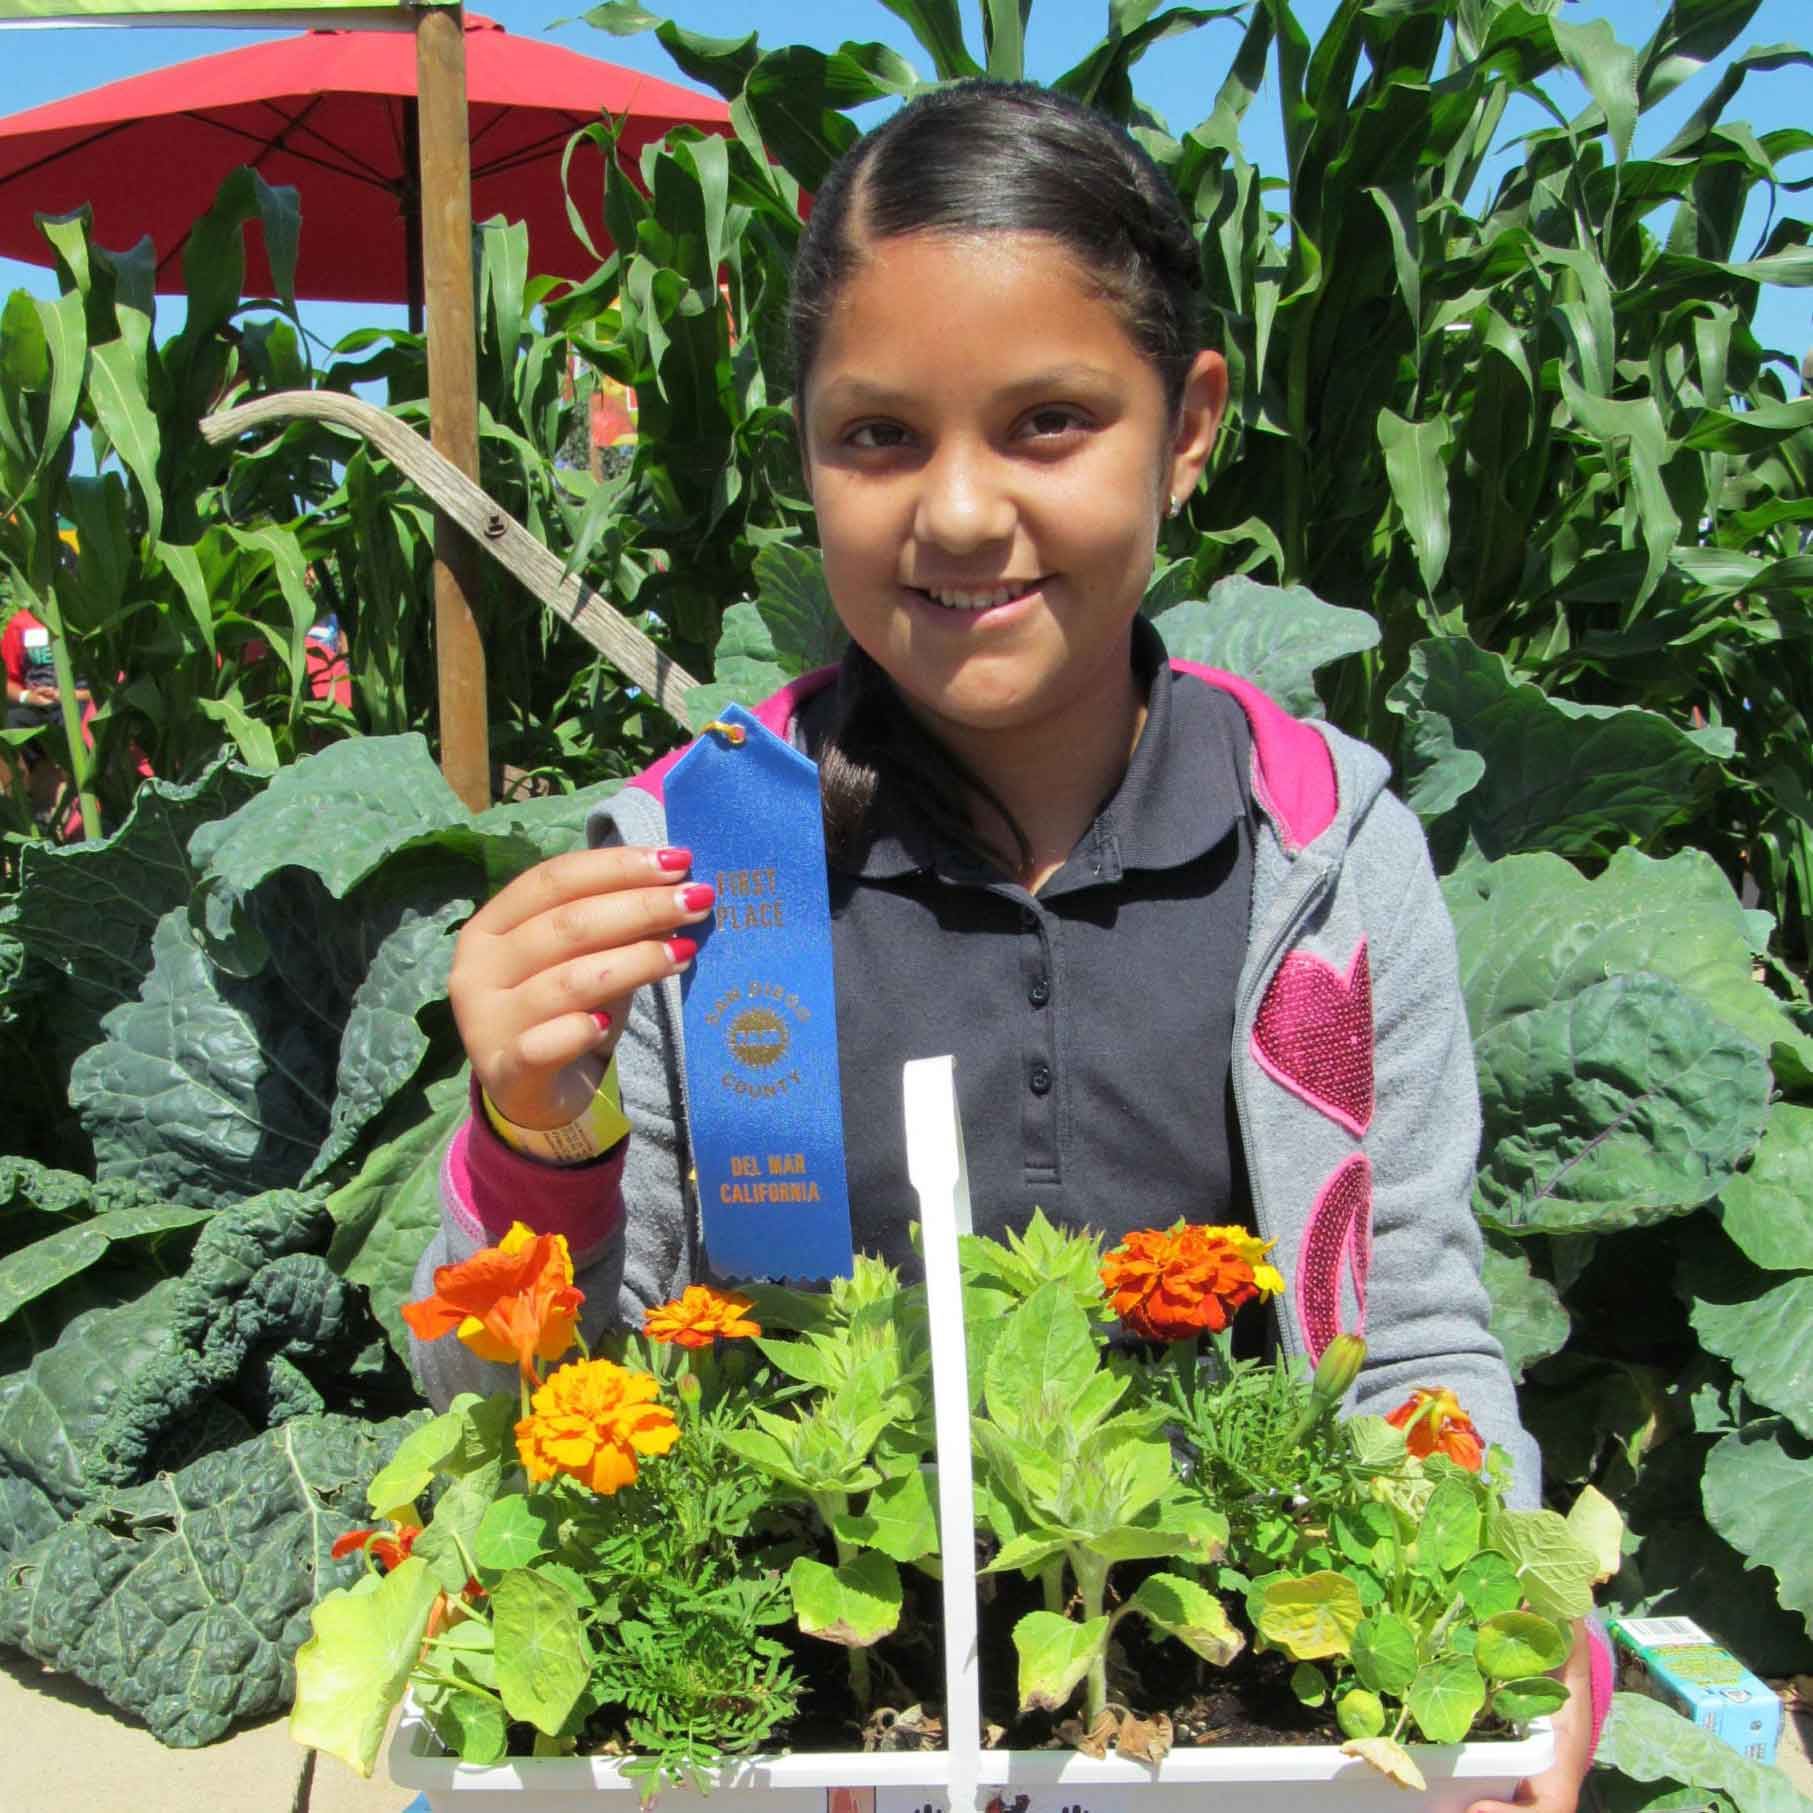 Student with hand-grown plant and award ribbon